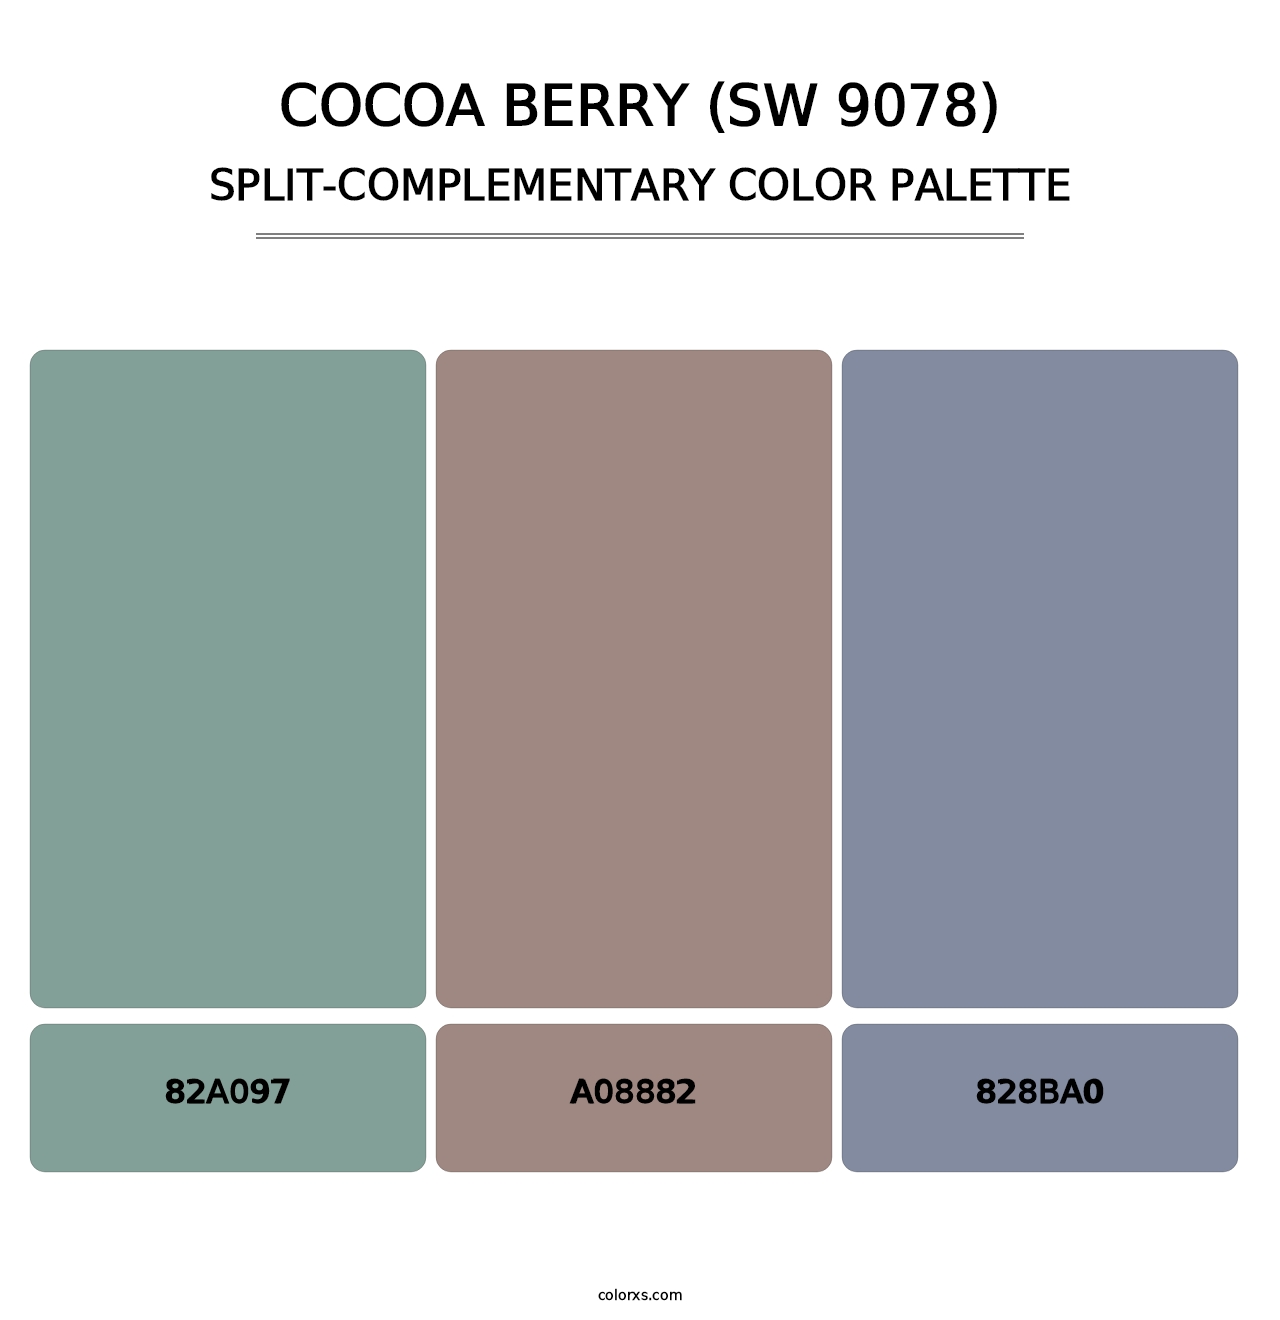 Cocoa Berry (SW 9078) - Split-Complementary Color Palette